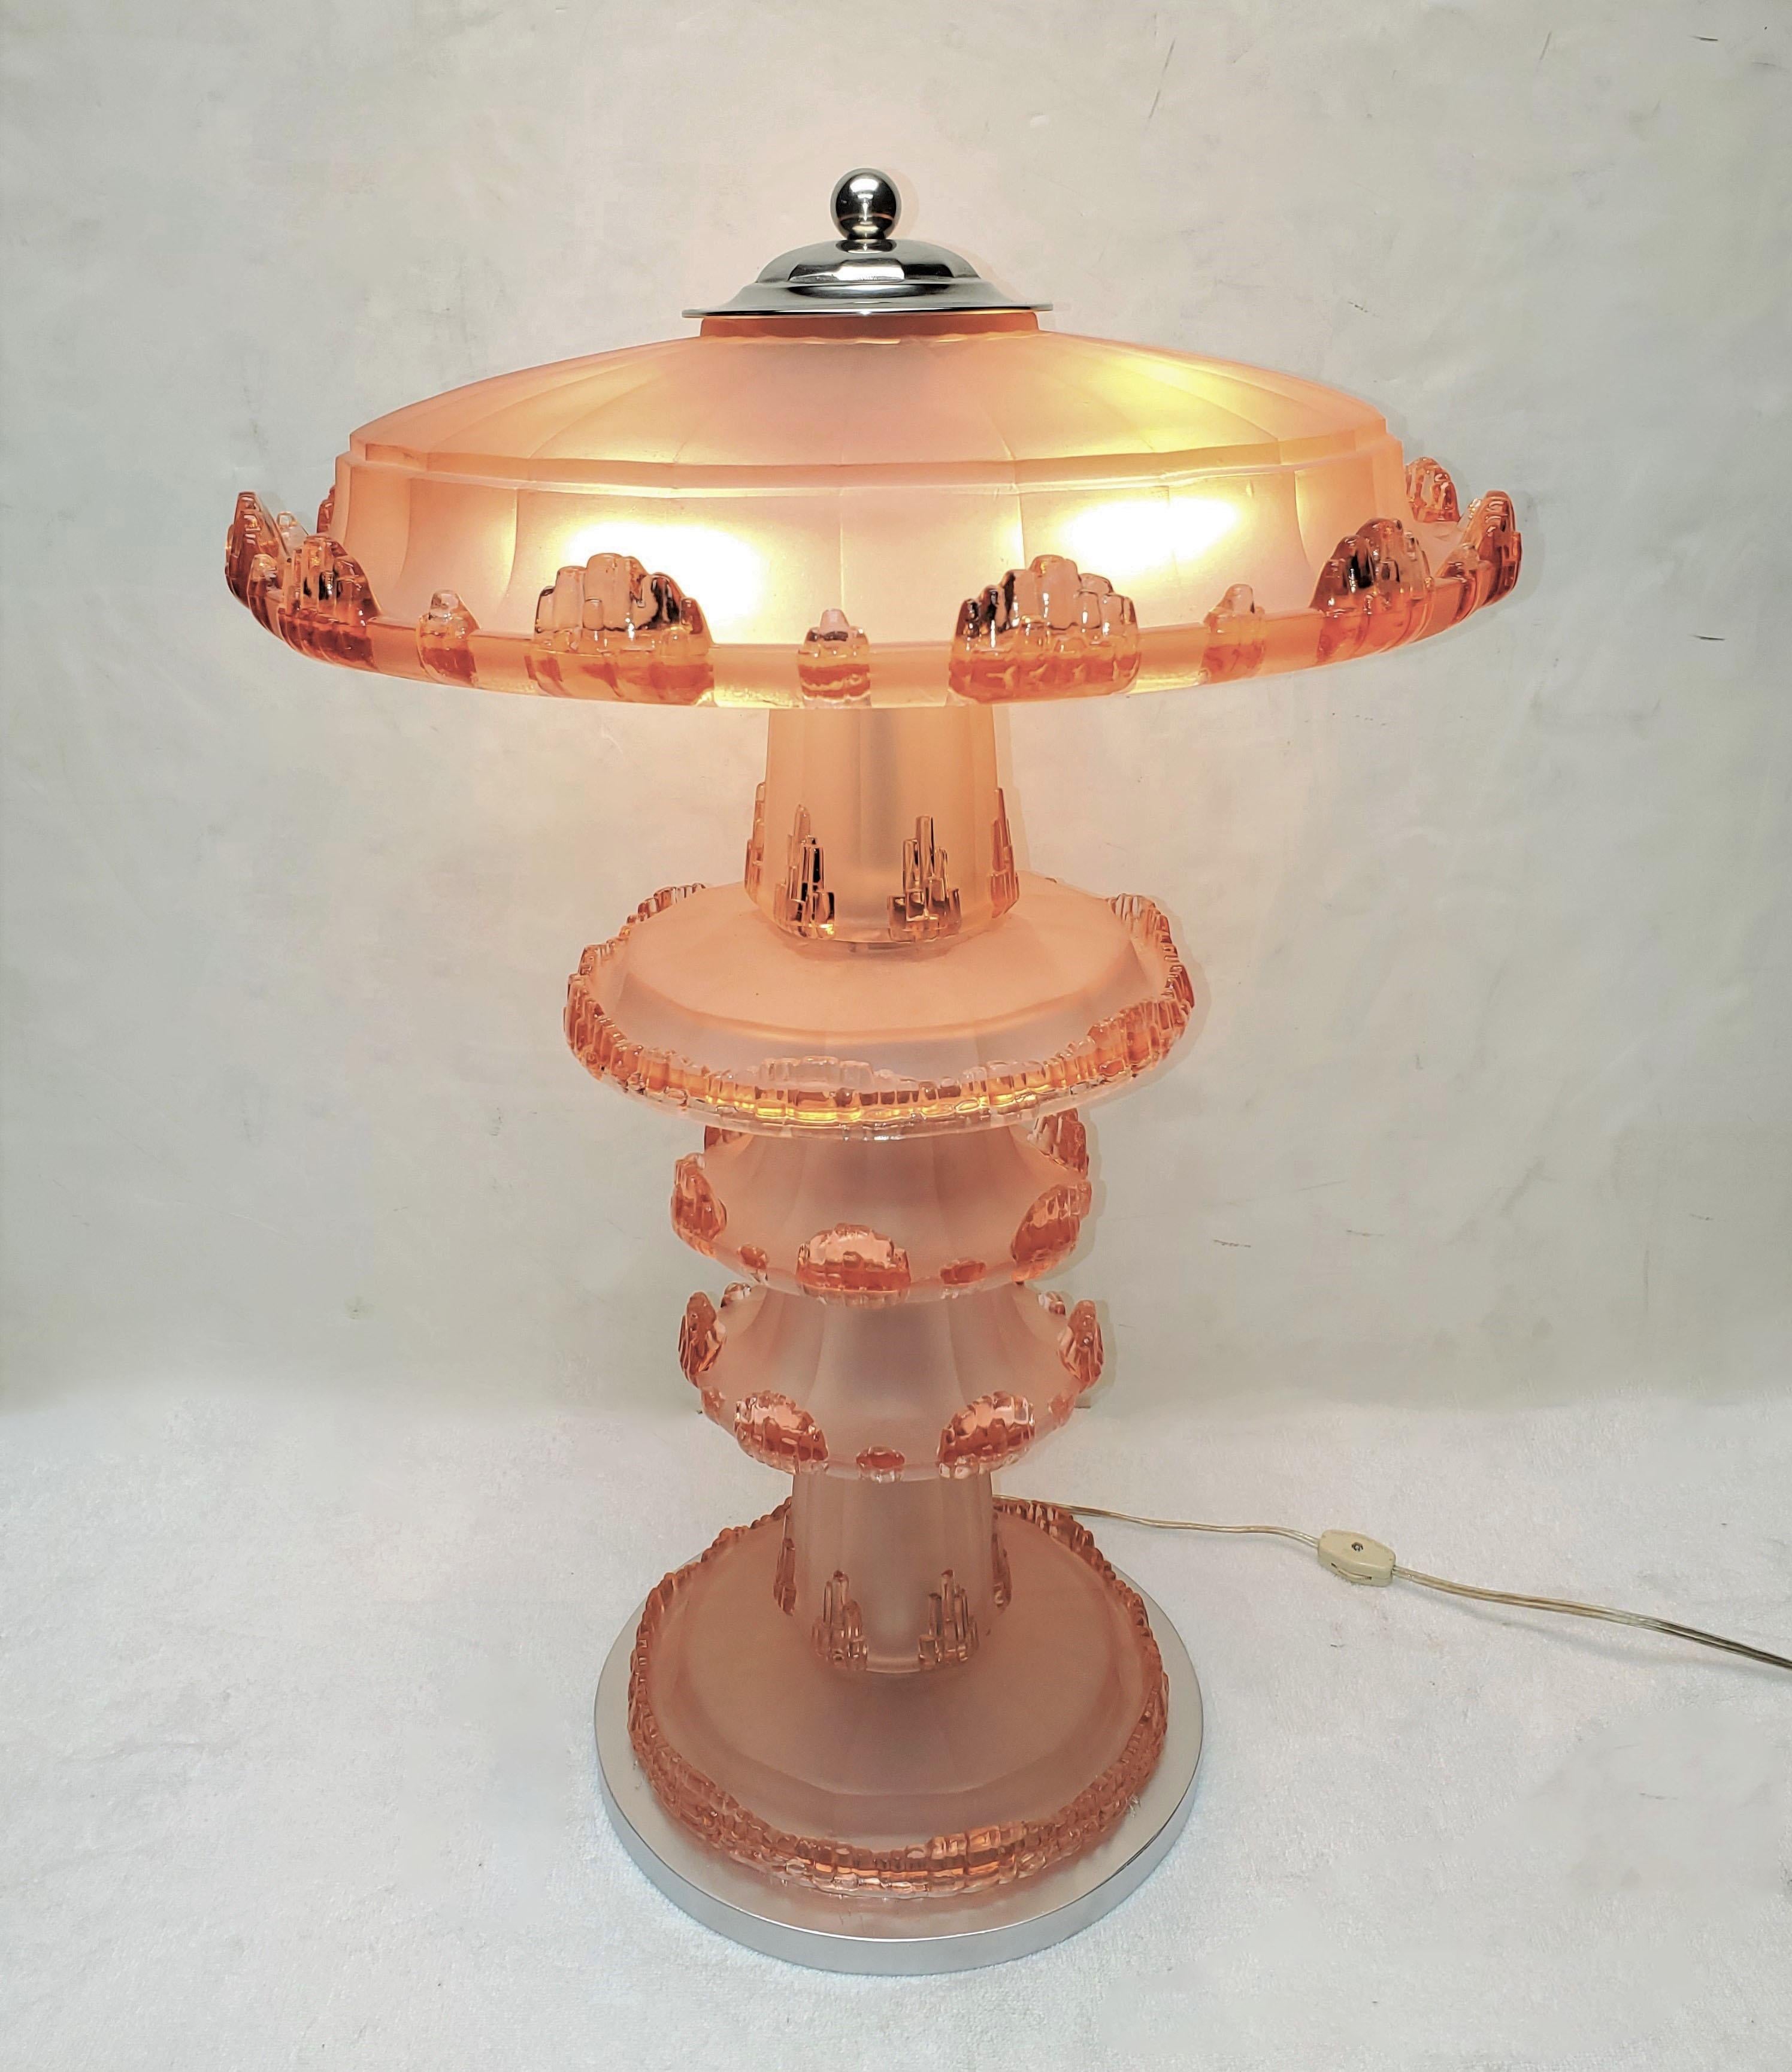 A fine French Art Deco pink / peach / living coral, flesh tinted frosted art glass table lamp, by Etablisseme Jean Gauthier, EJG. 
Extracting ideas from elements of nature, multi tiers of glass with polished accents, drip like water in a series of